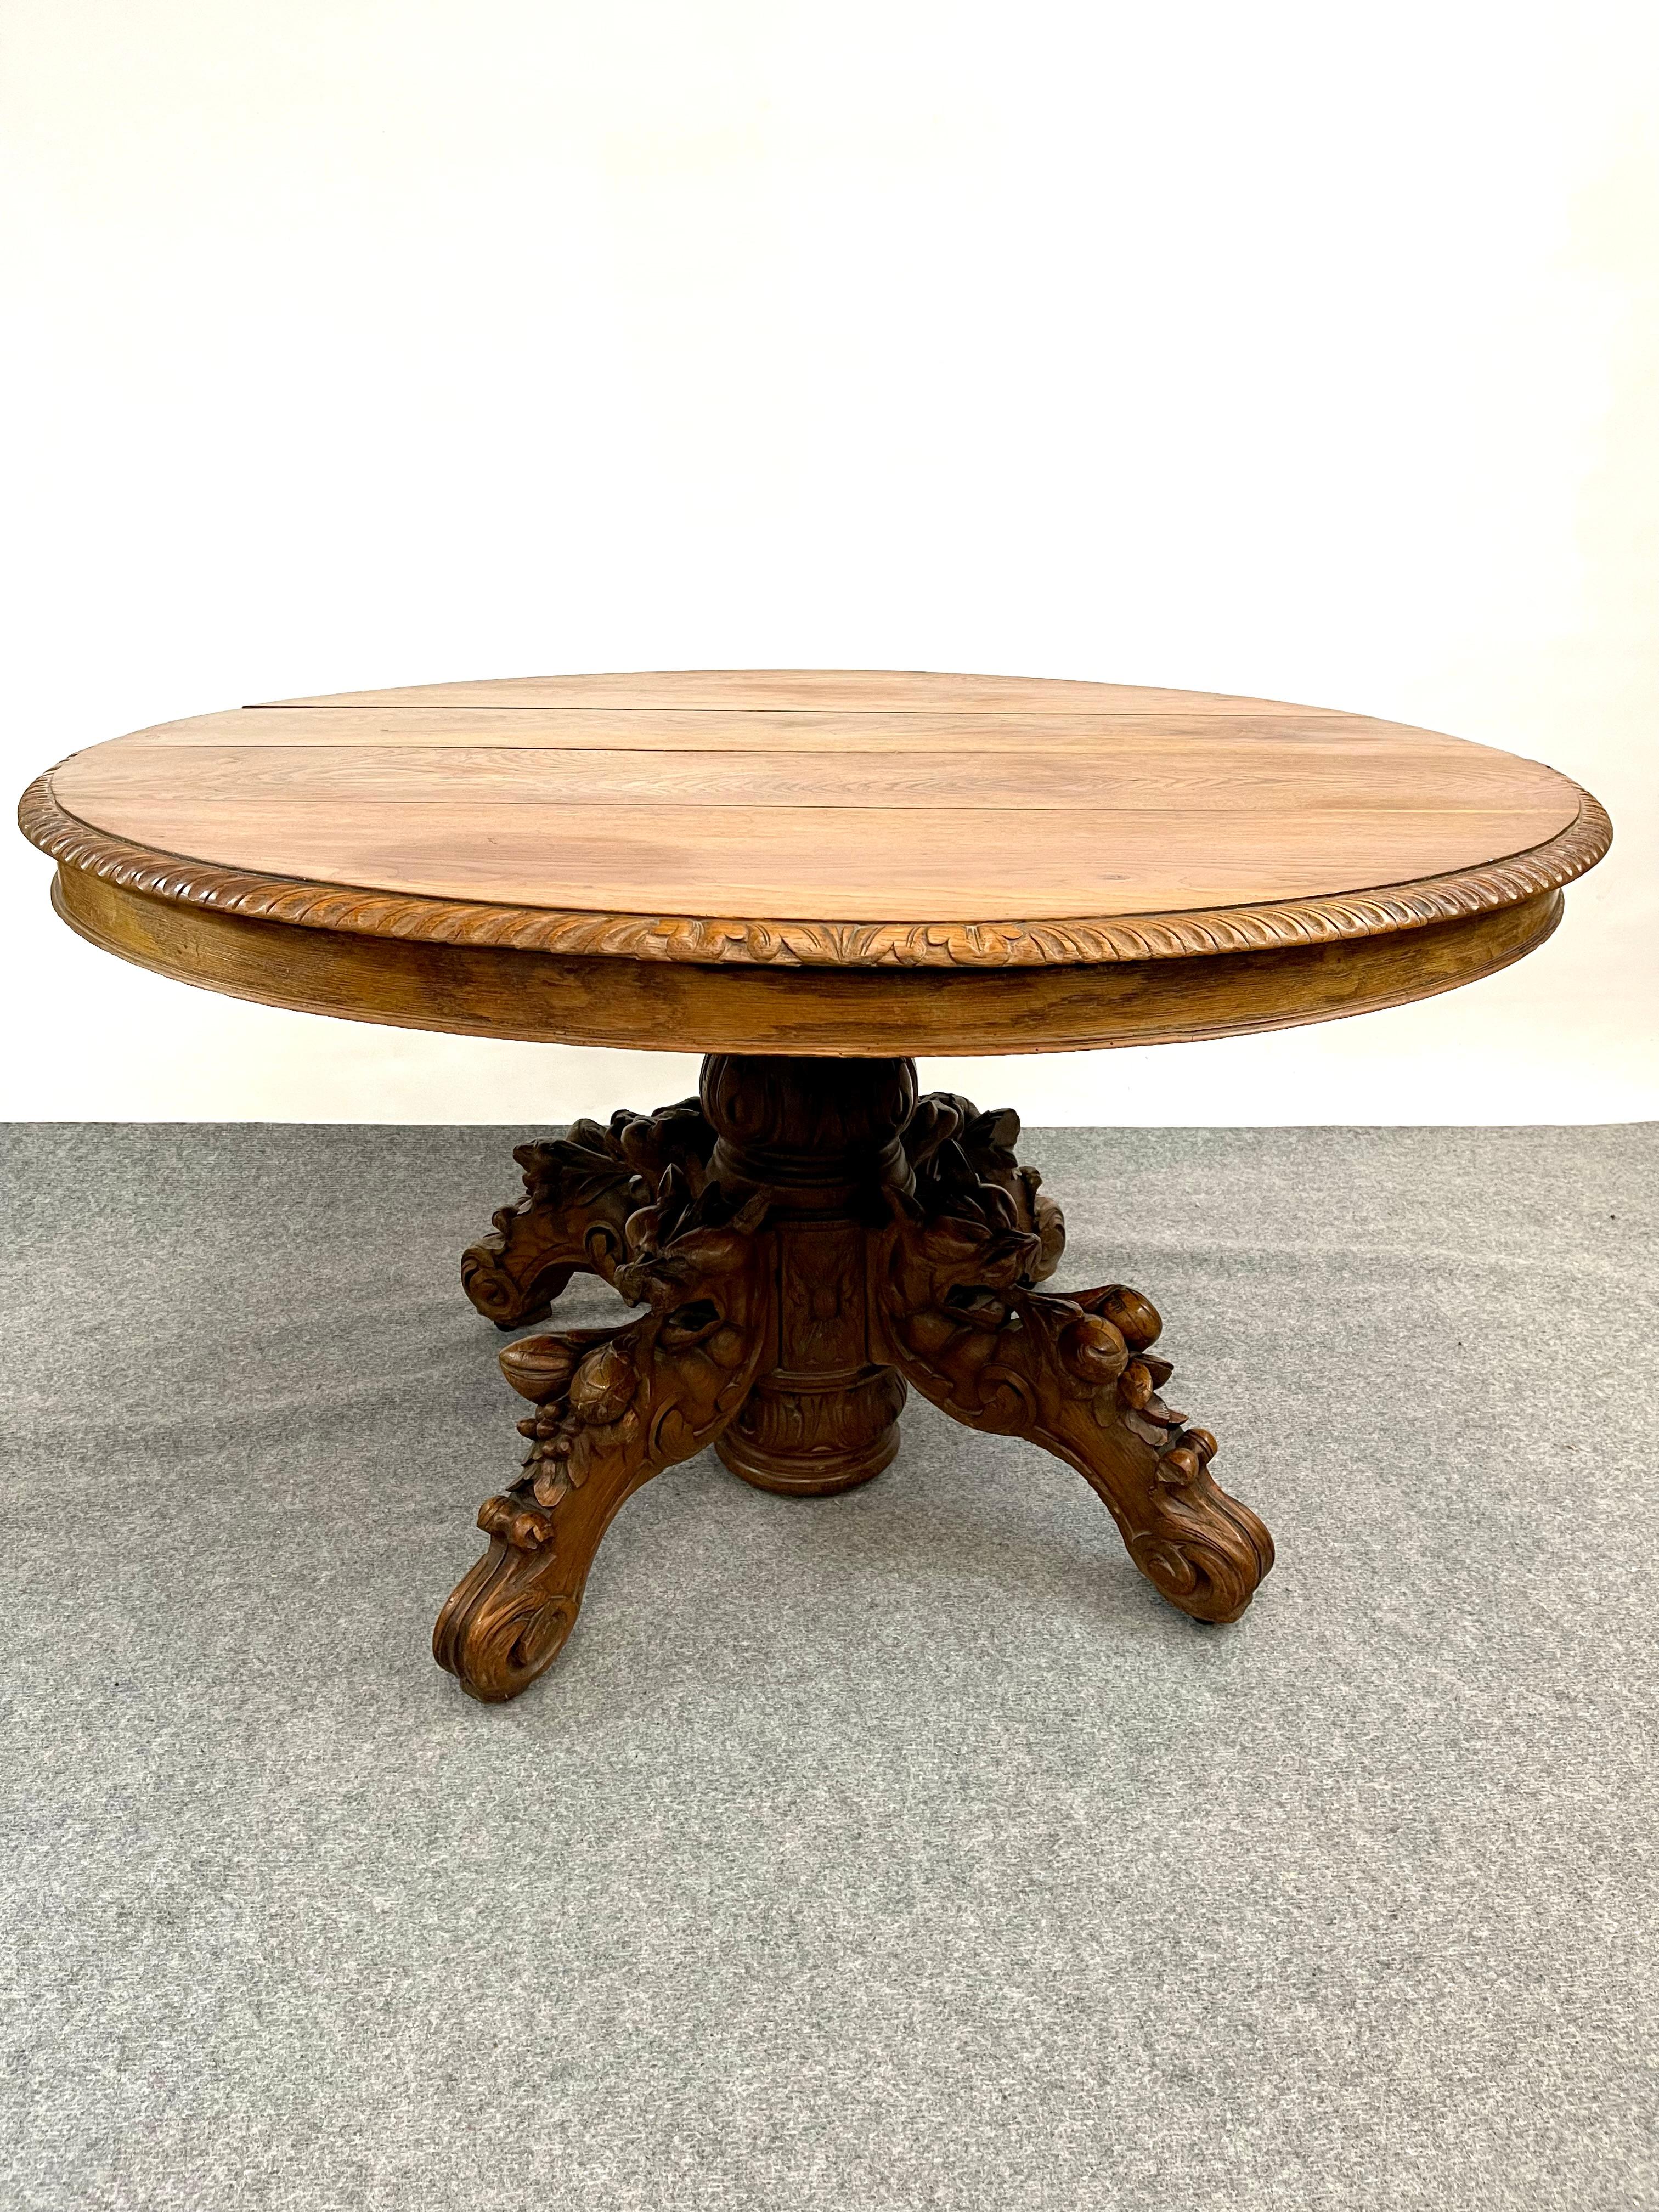 Antique French round coffee table pedestal Black Forest hunt table griffons 19th For Sale 1